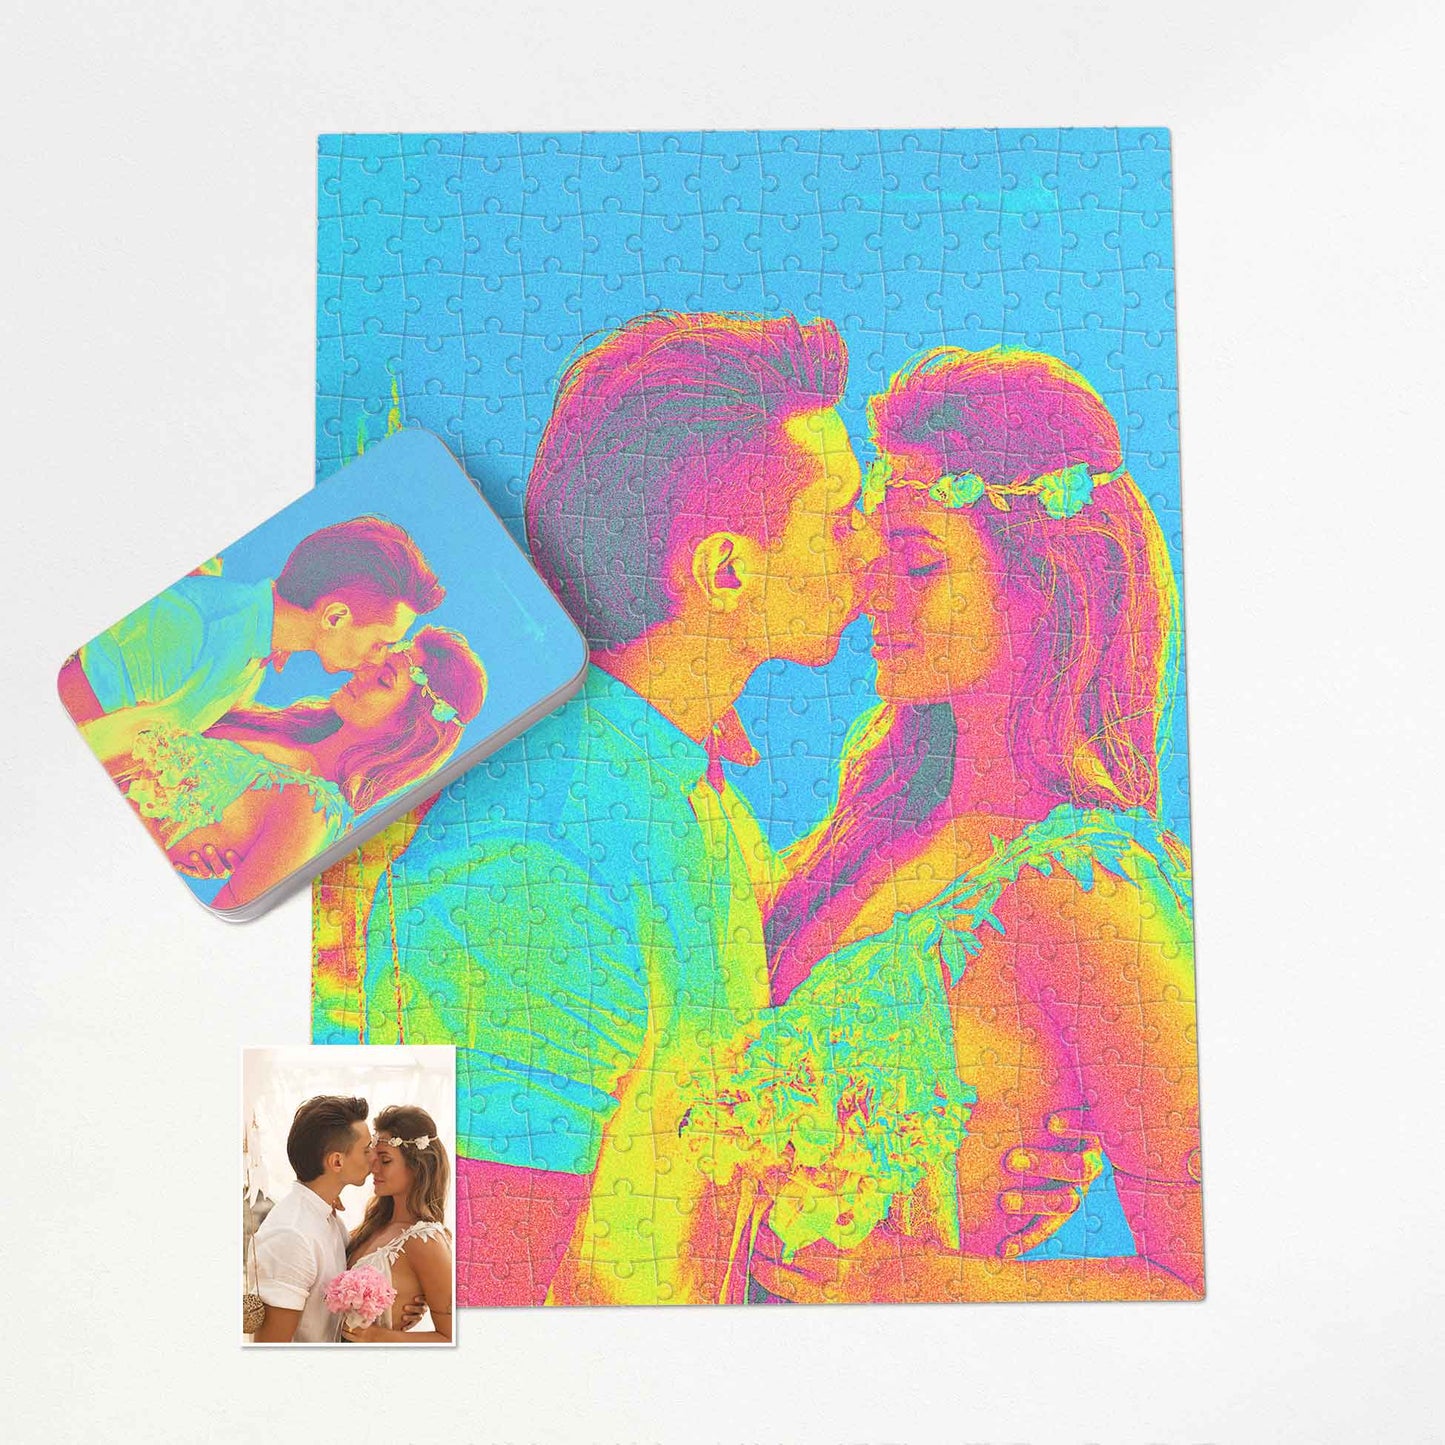 Explore the surreal with our Personalised Acid Trip Jigsaw Puzzle. Print from photo in cool acid colors effect with blue, green, and pink hues. Handmade and edgy, it's a trendy and funky gift for friends and family